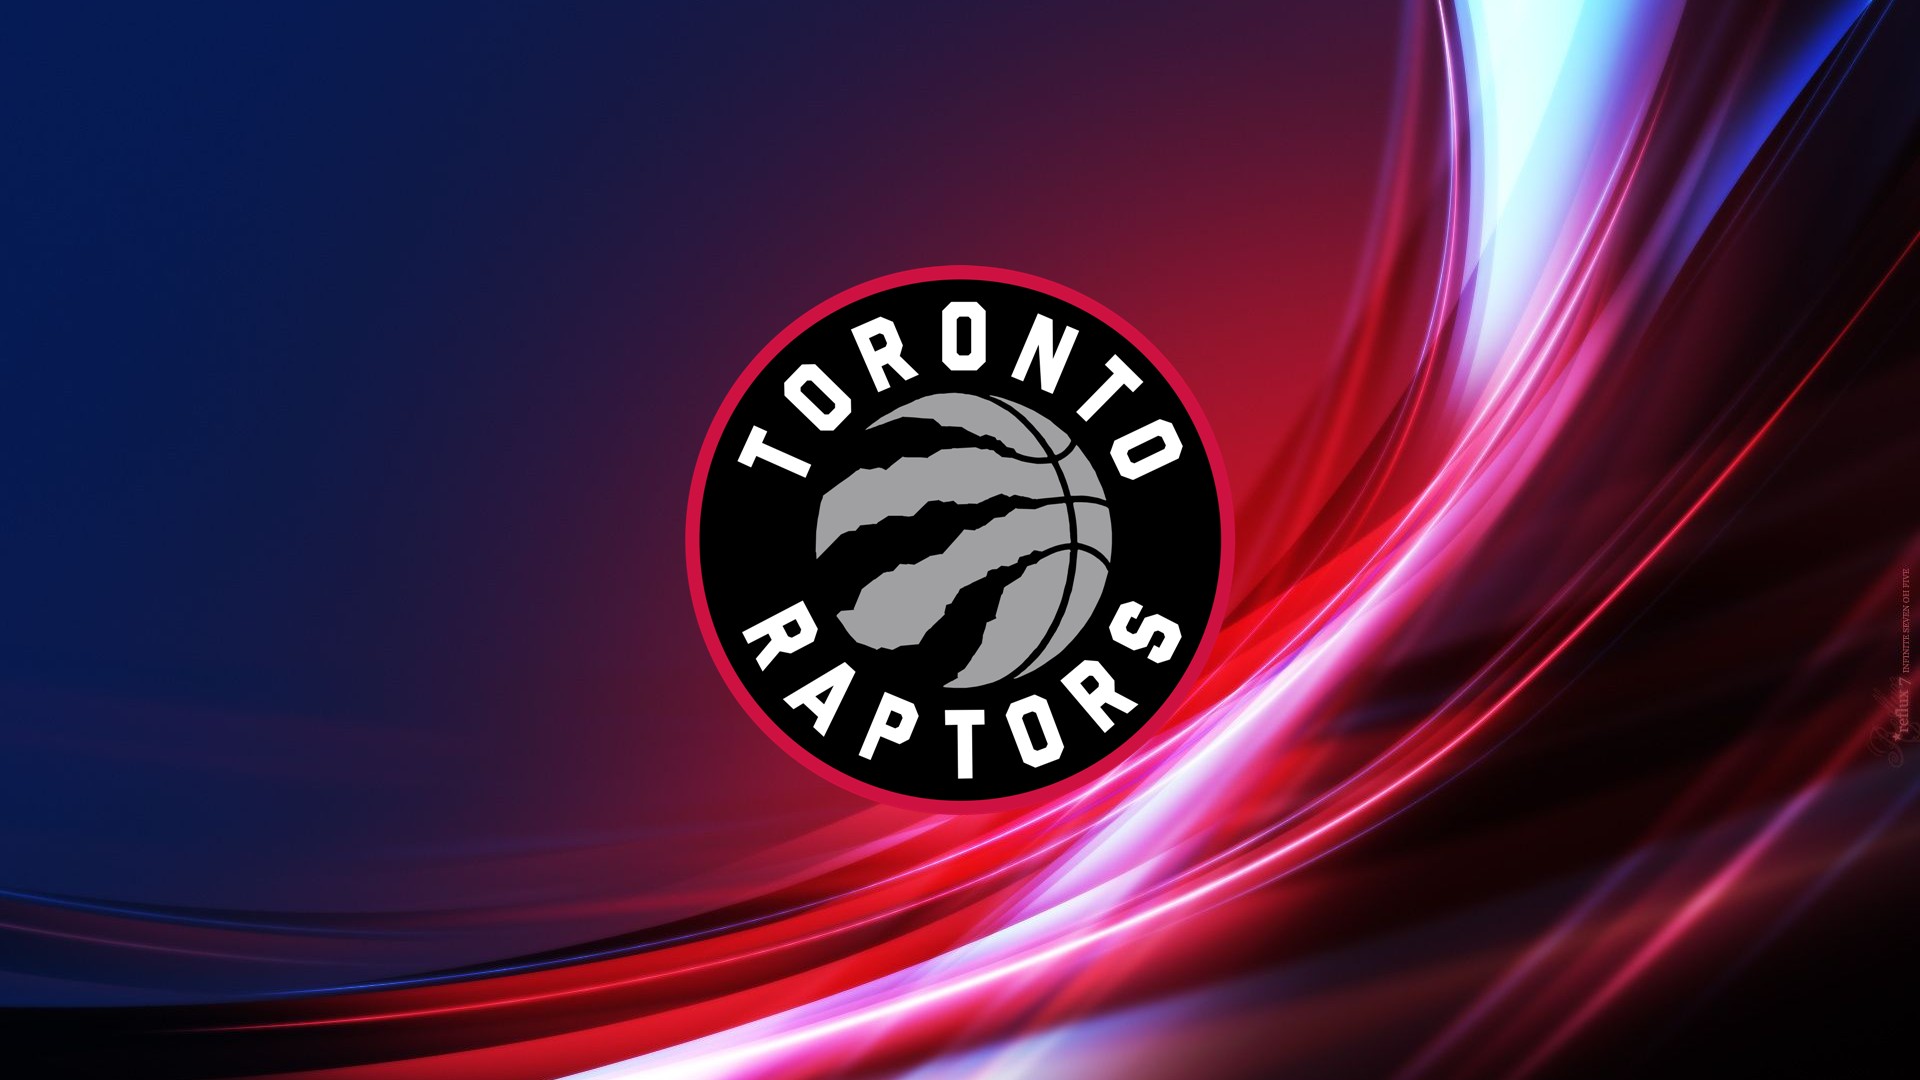 HD Desktop Wallpaper Toronto Raptors Logo with high-resolution 1920x1080 pixel. You can use this wallpaper for your Desktop Computer Backgrounds, Windows or Mac Screensavers, iPhone Lock screen, Tablet or Android and another Mobile Phone device